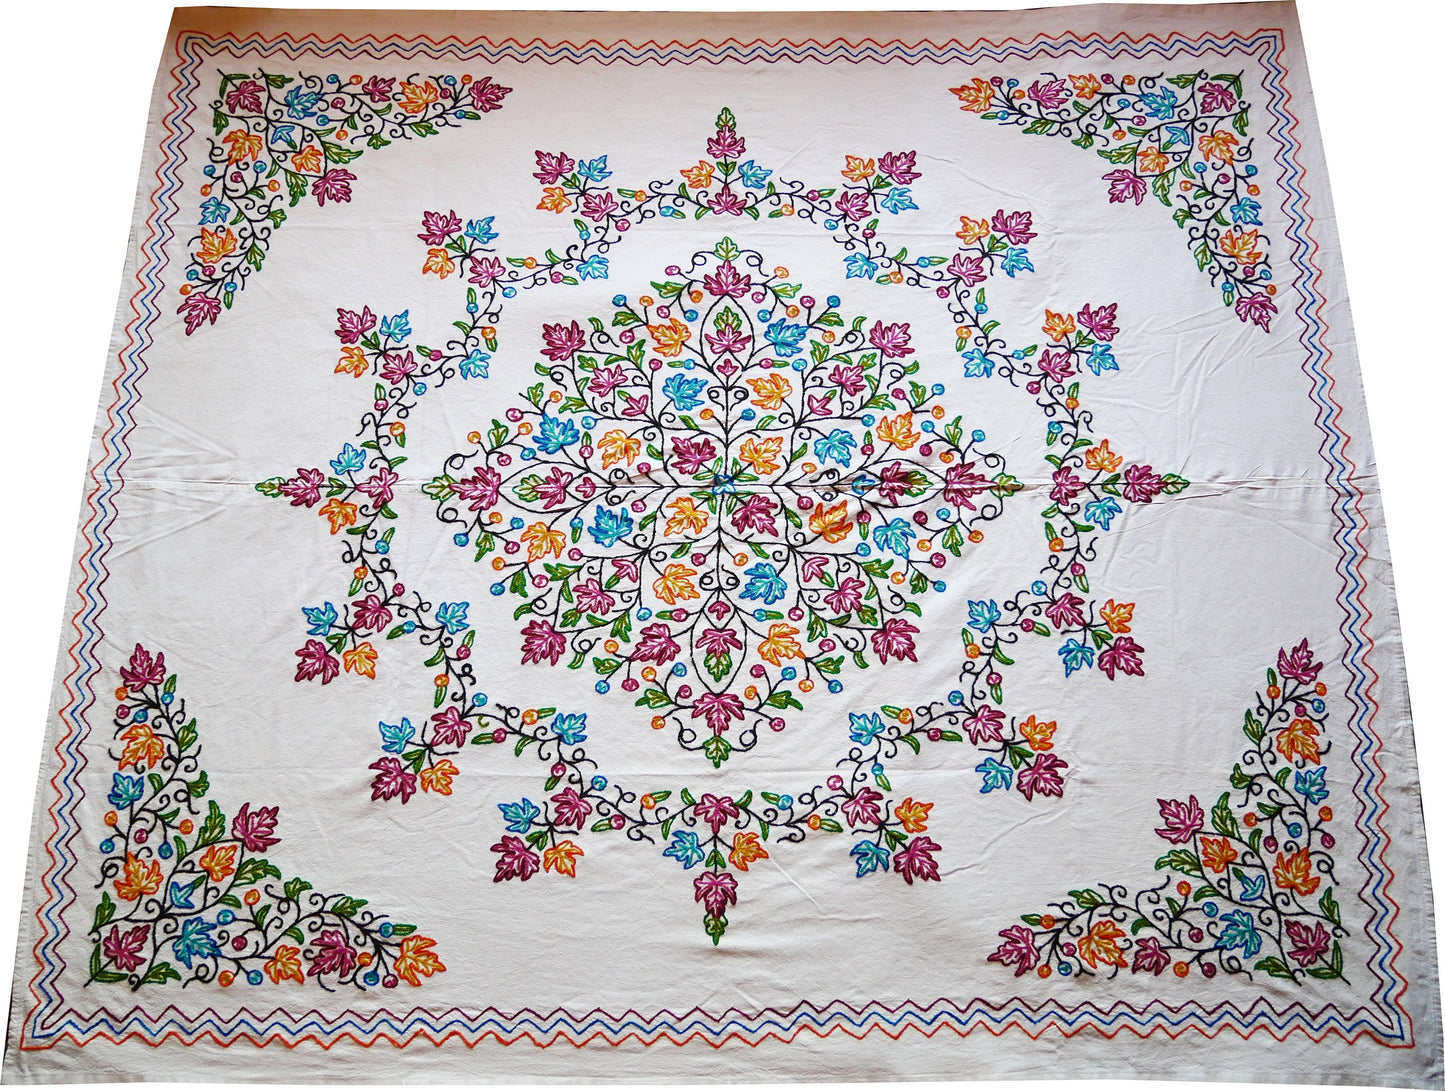 Kashmiri bedding - cotton and wool bed throw - elegant floral embroidery